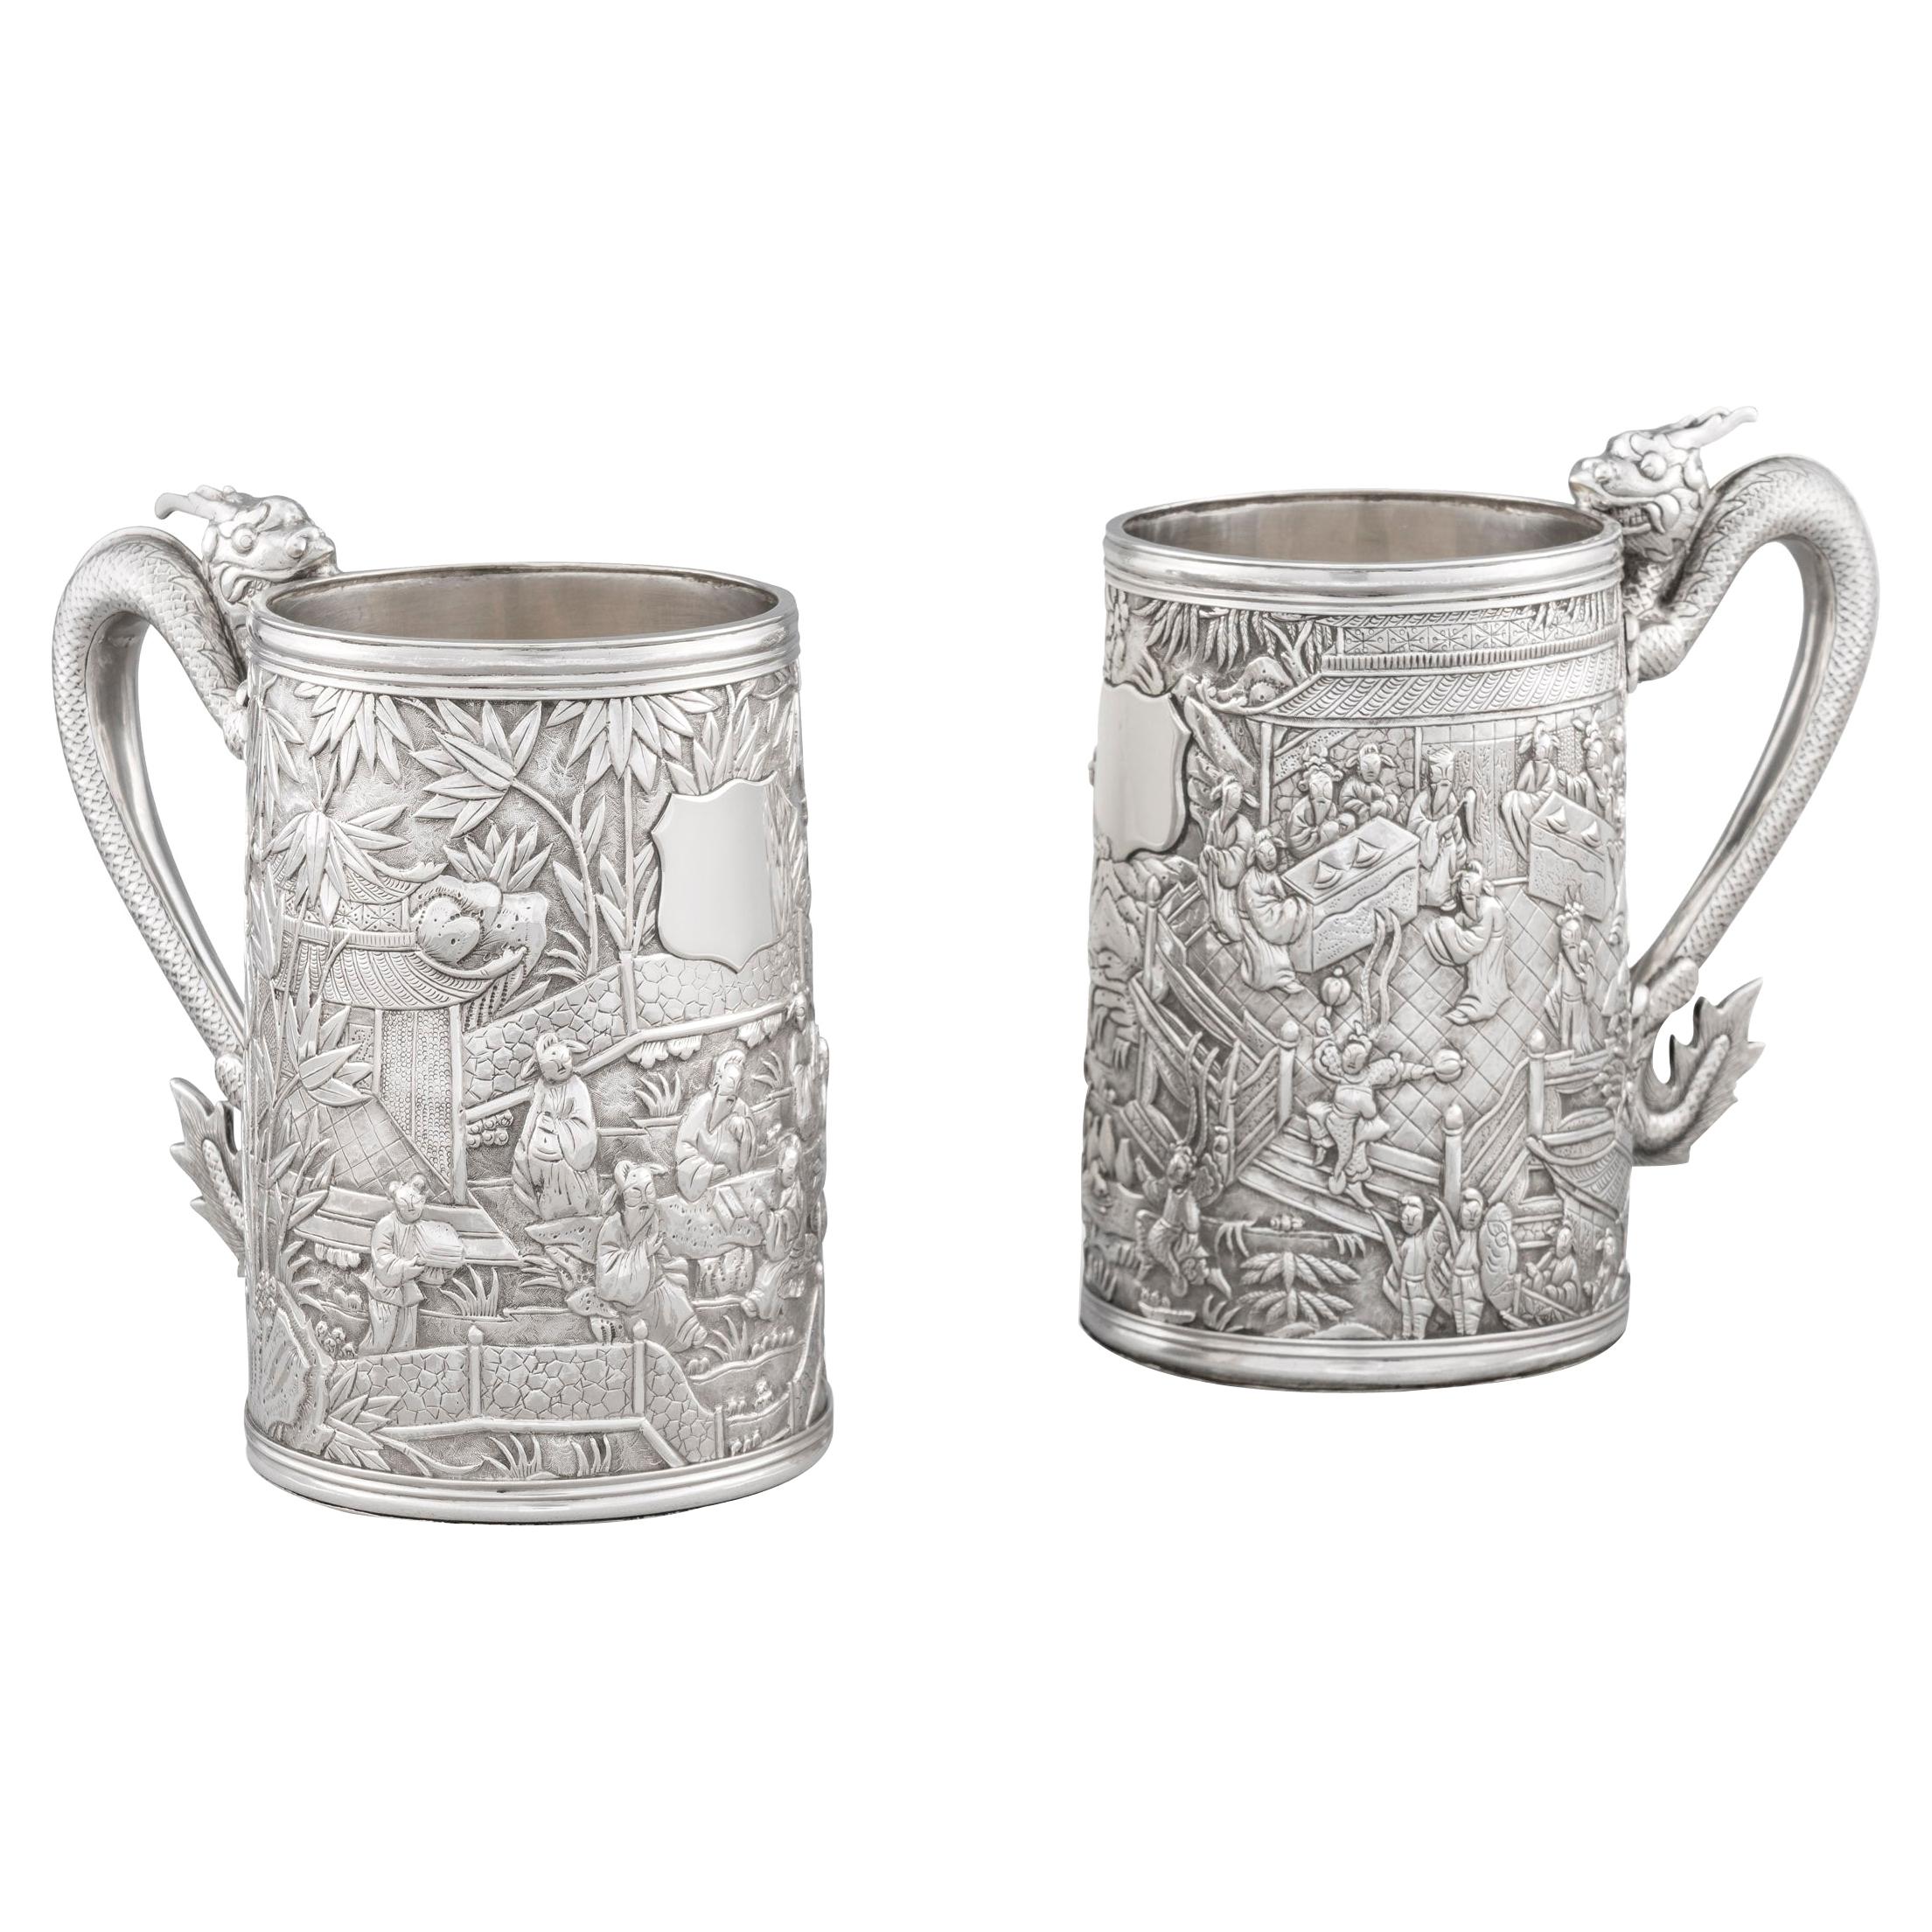 Pair of Chinese Export Silver Tankards